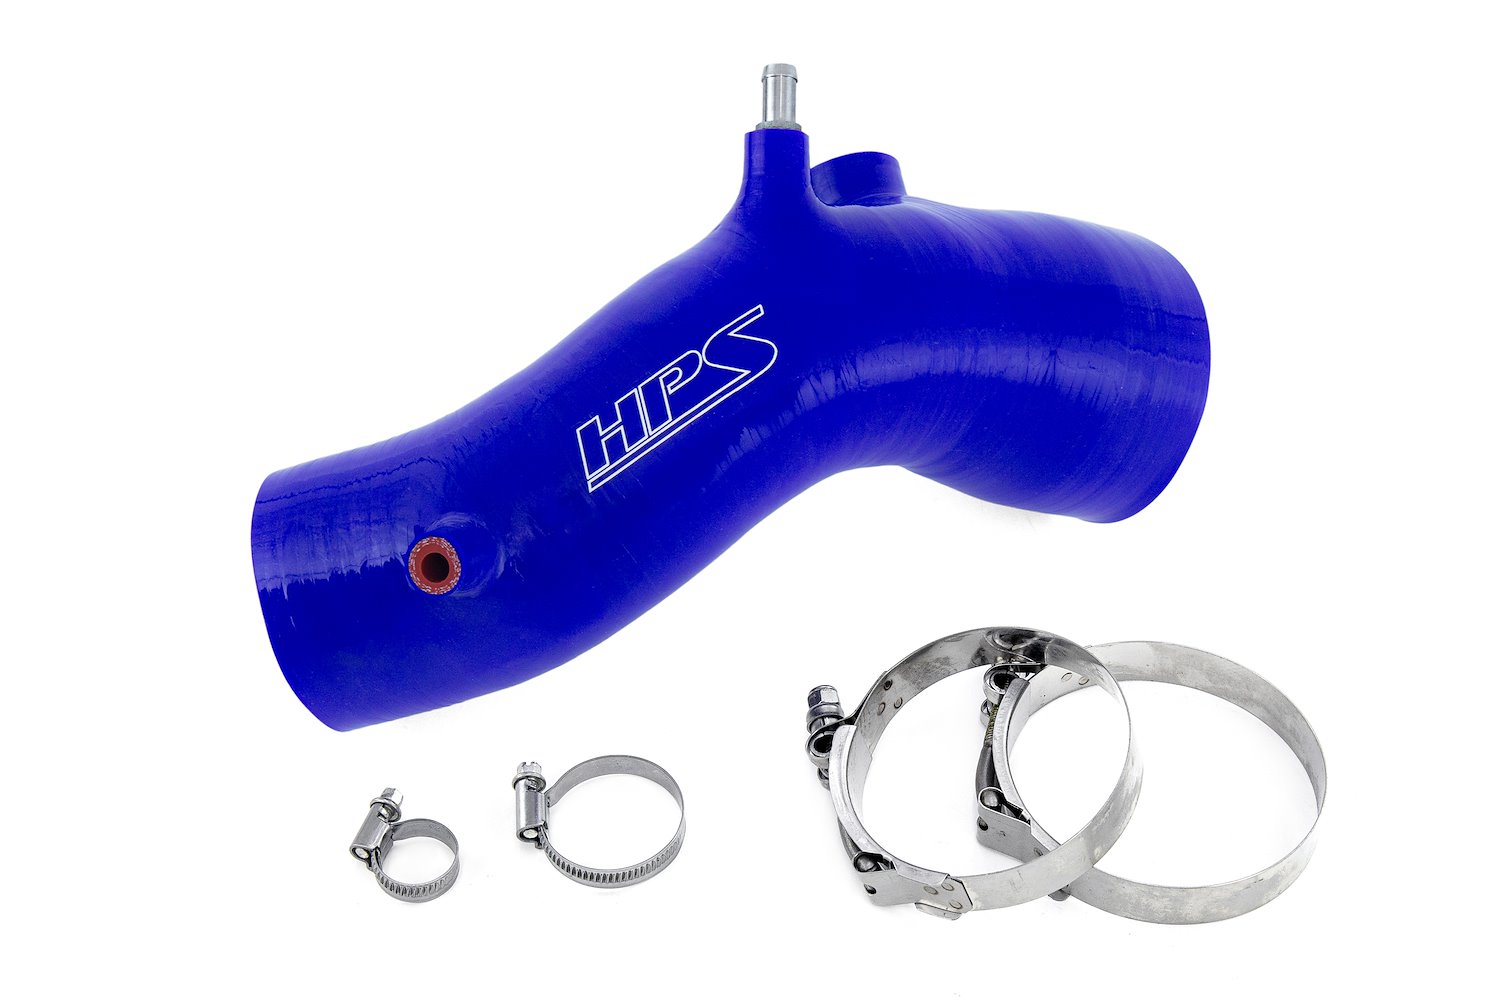 57-1844-BLUE Silicone Air Intake Kit, Replaces Stock Restrictive Air Intake, Improve Throttle Response, No Heat Soak